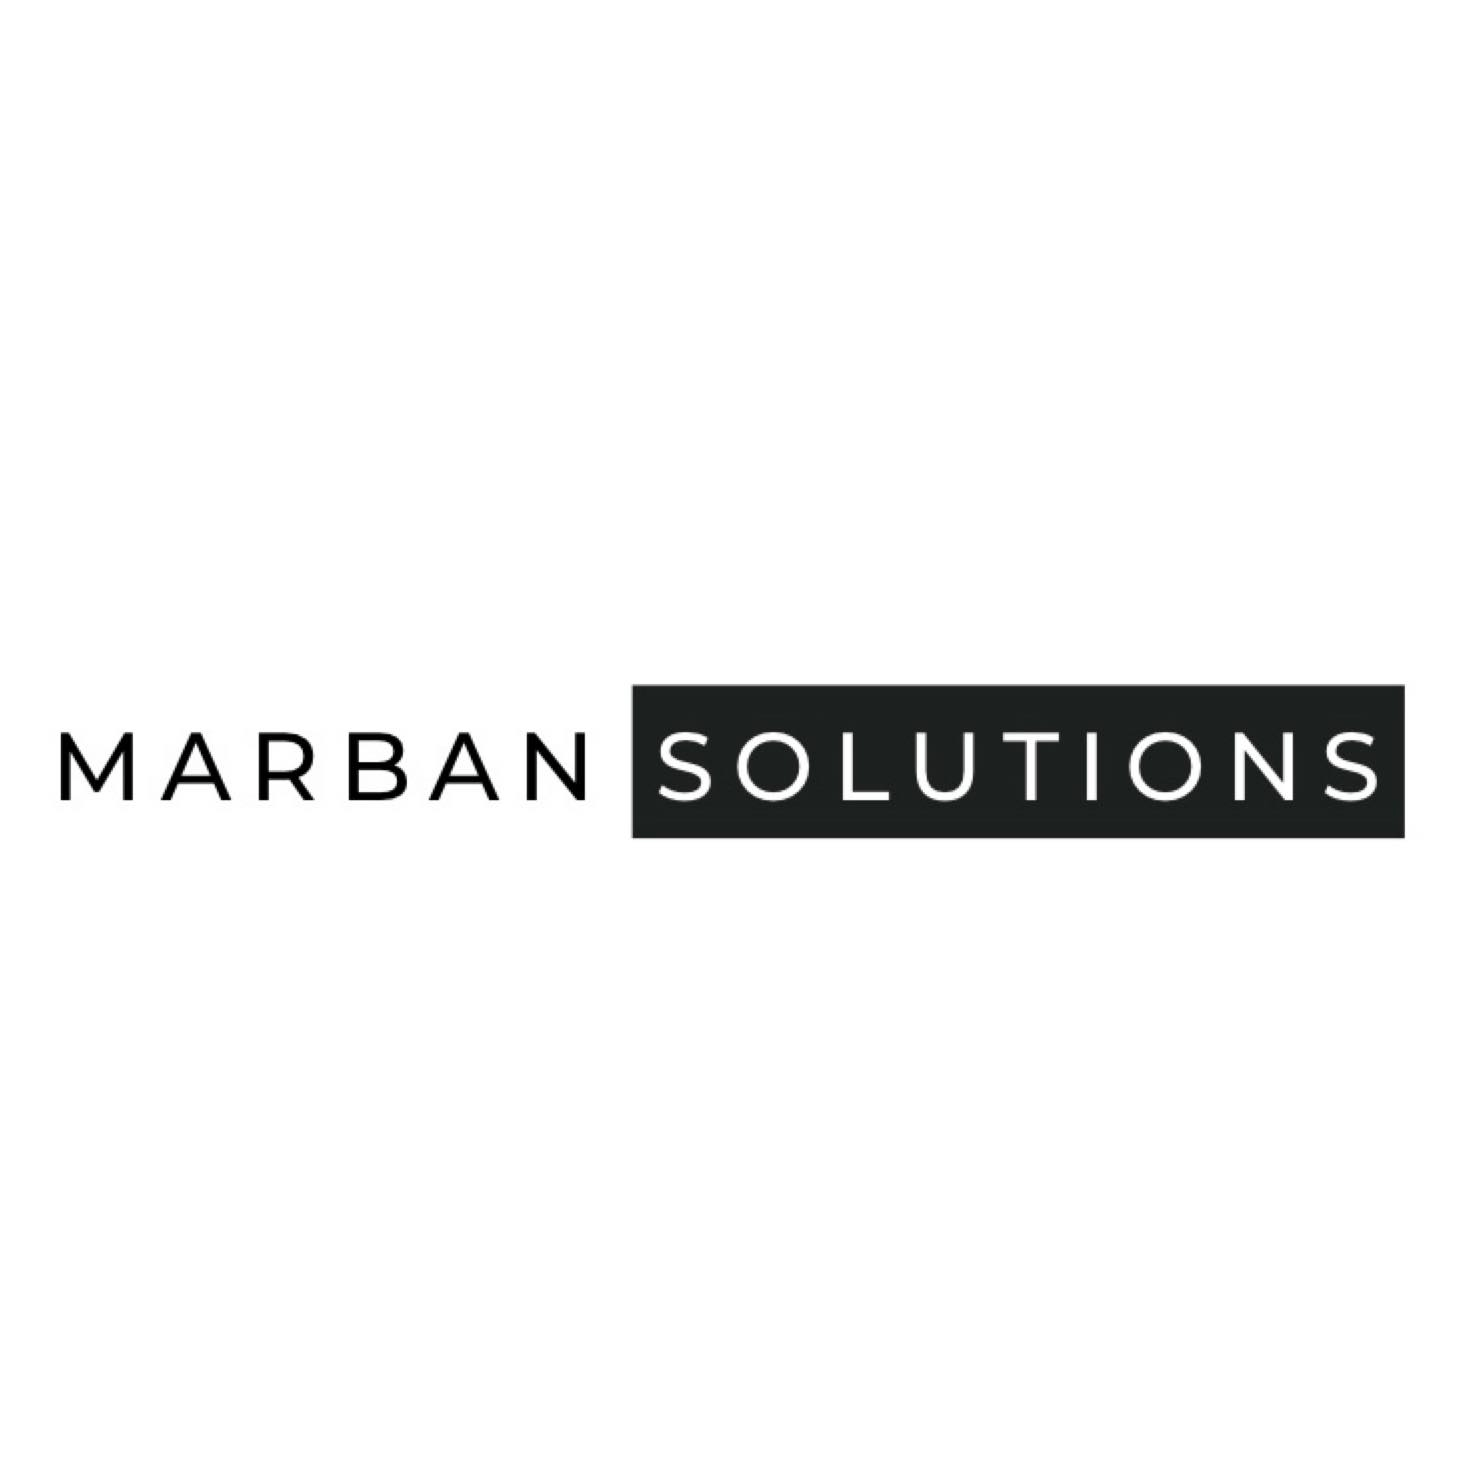 Marban Solutions